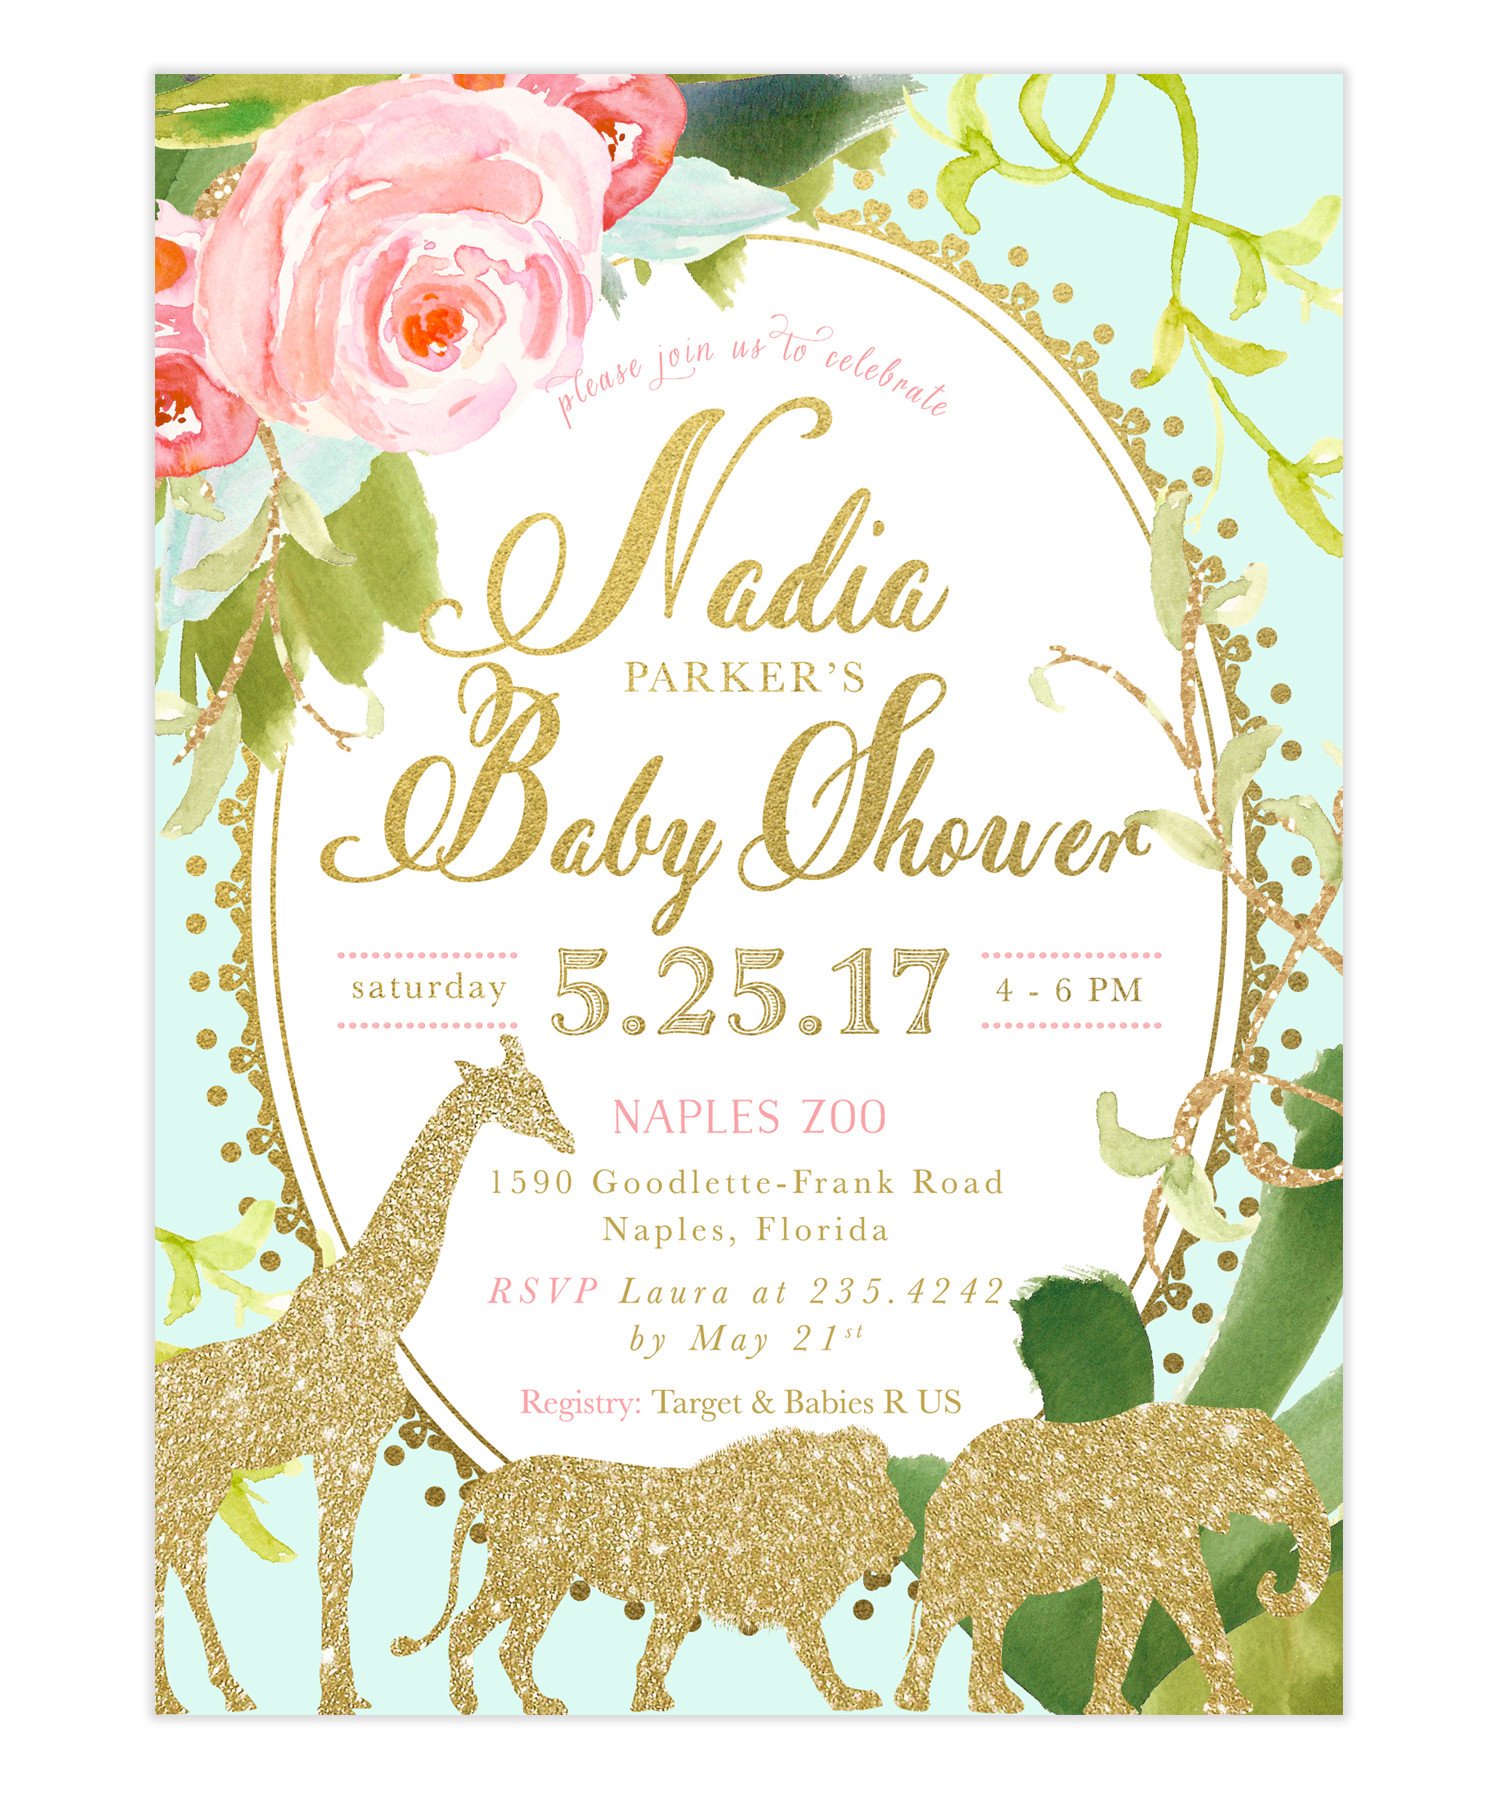 Full Size of Baby Shower:nursery Themes Elegant Baby Shower Unique Baby Shower Decorations Pinterest Baby Shower Ideas For Girls Homemade Baby Shower Decorations Unique Baby Shower Themes Nautical Baby Shower Invitations For Boys Printable Baby Shower Invitations For Girl